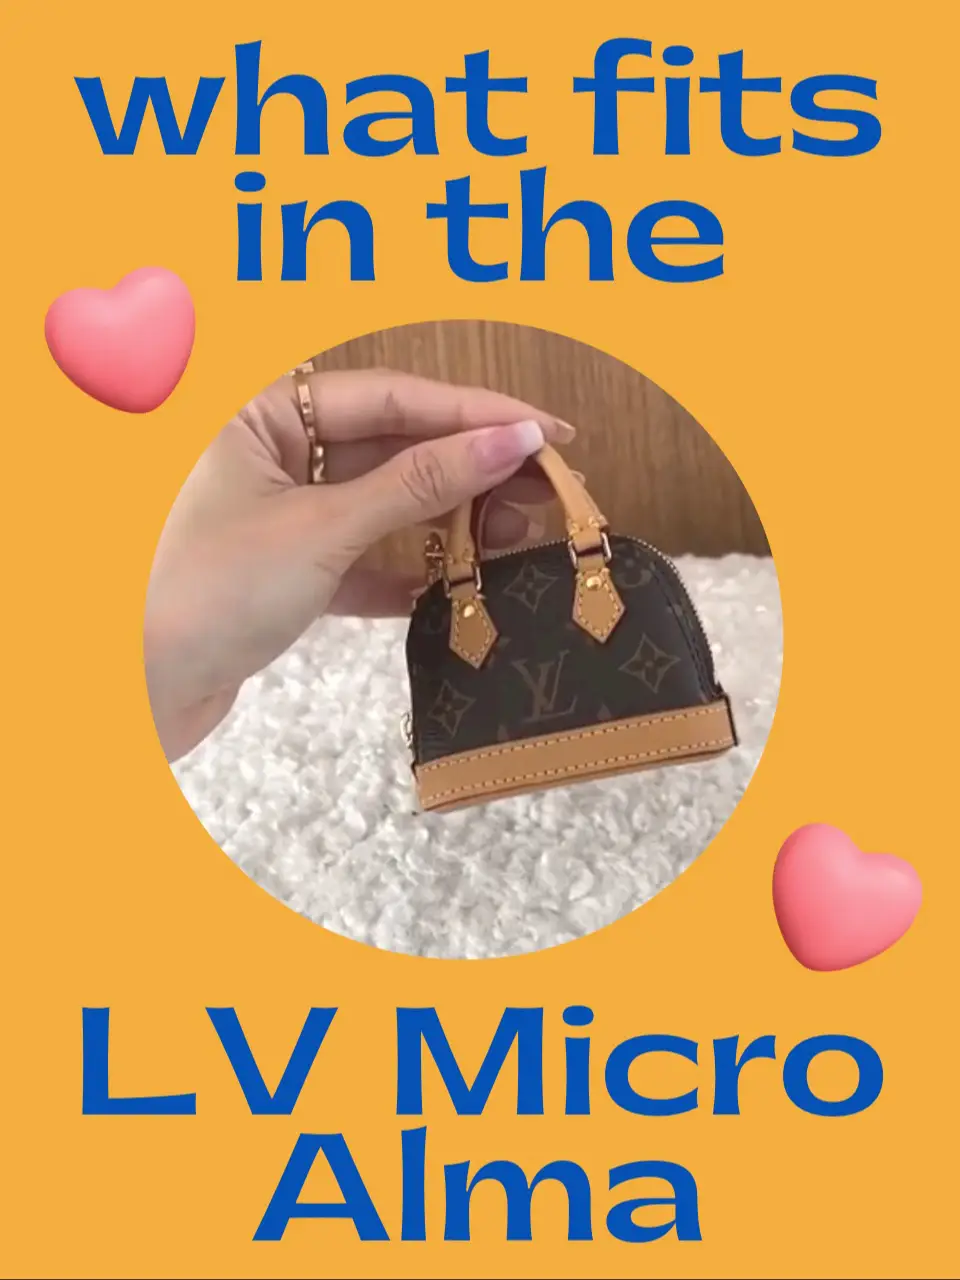 The cutest LV bag ever 🥹😍🤩, Video published by Savi Chow